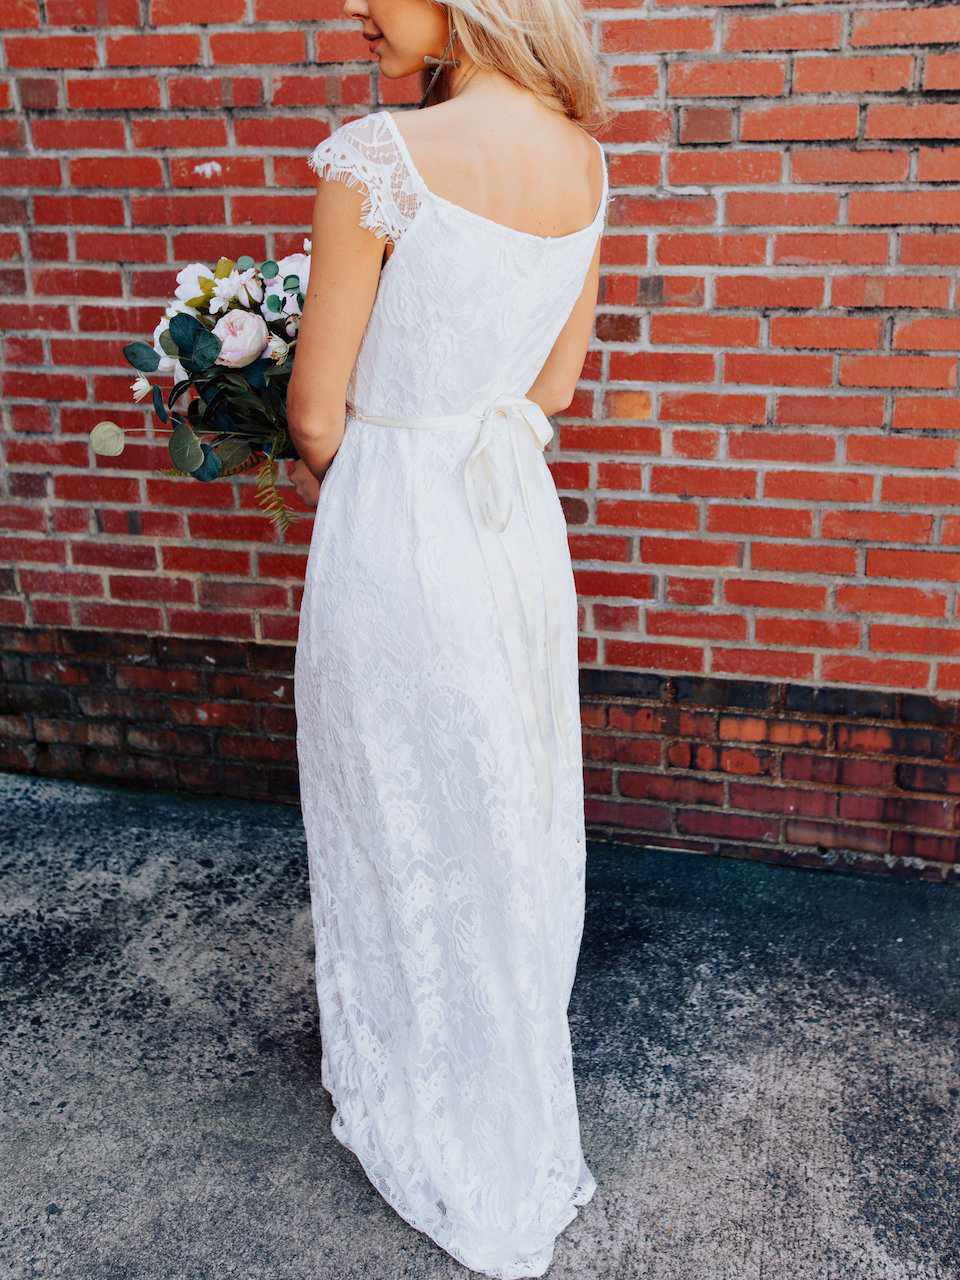 Adore You Dress - White-Dresses-Southern Fried Chics